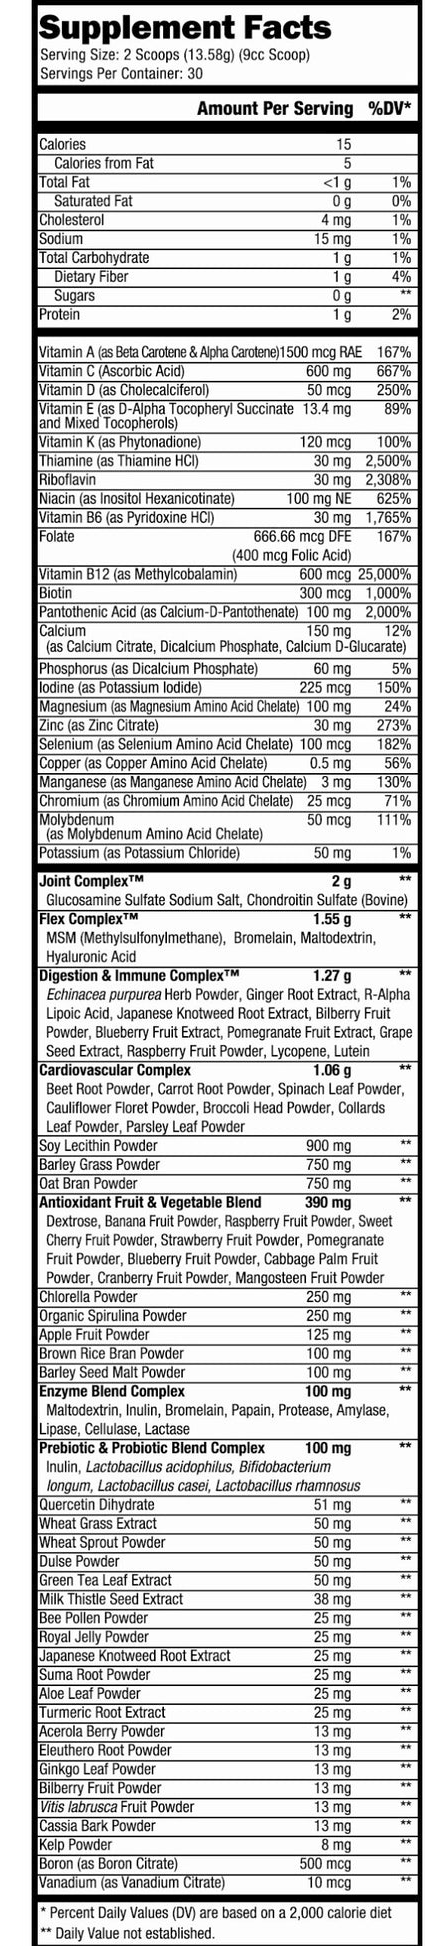 Nutritional chart showing servings, calories, and detailed breakdown of vitamins, minerals, and various complex blends in a dietary supplement.